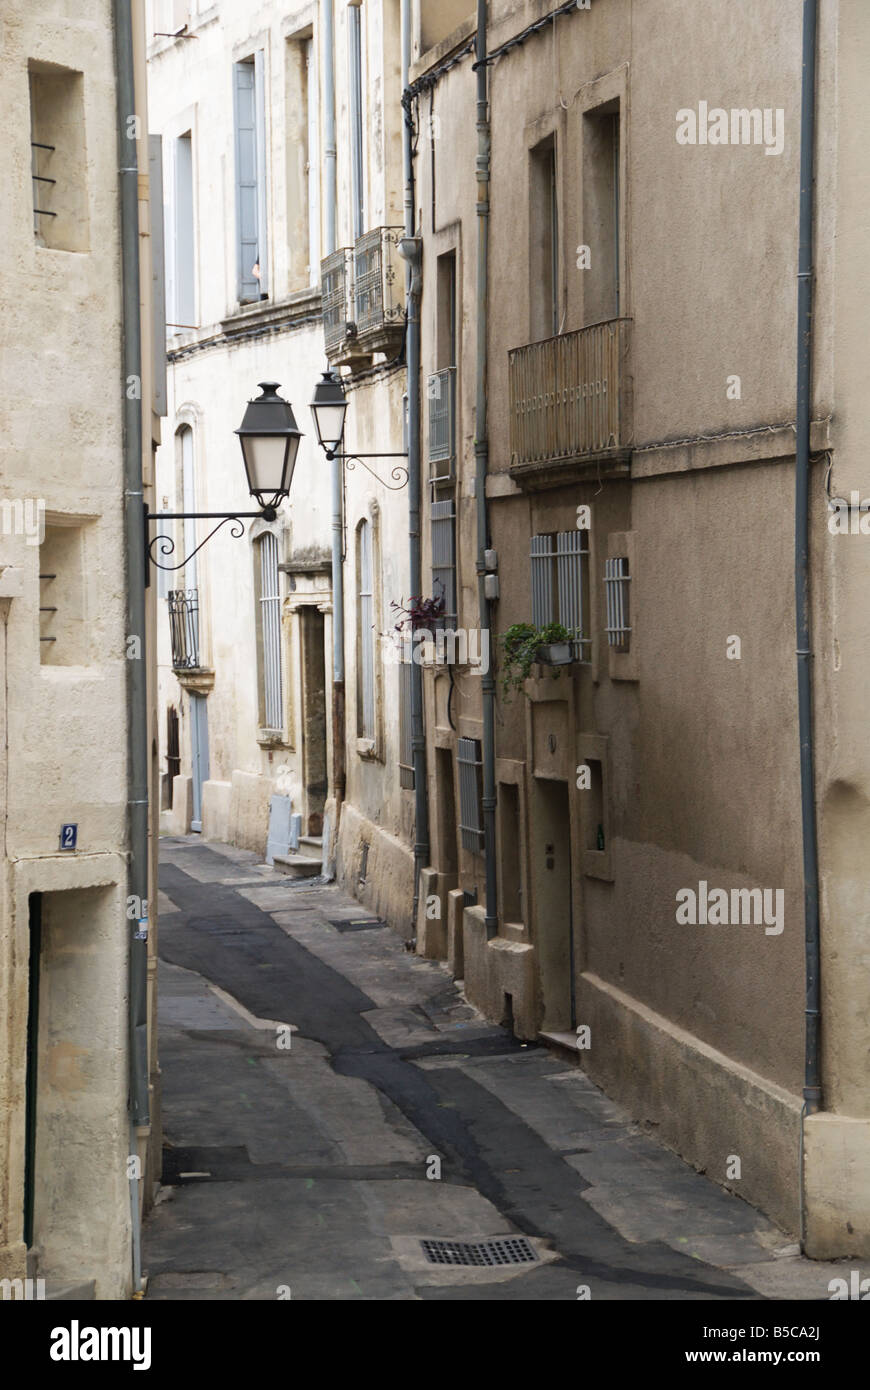 A typical street in the old city of Montpellier with a narrow alley between sandstone buildings and old fashioned lanterns. Stock Photo